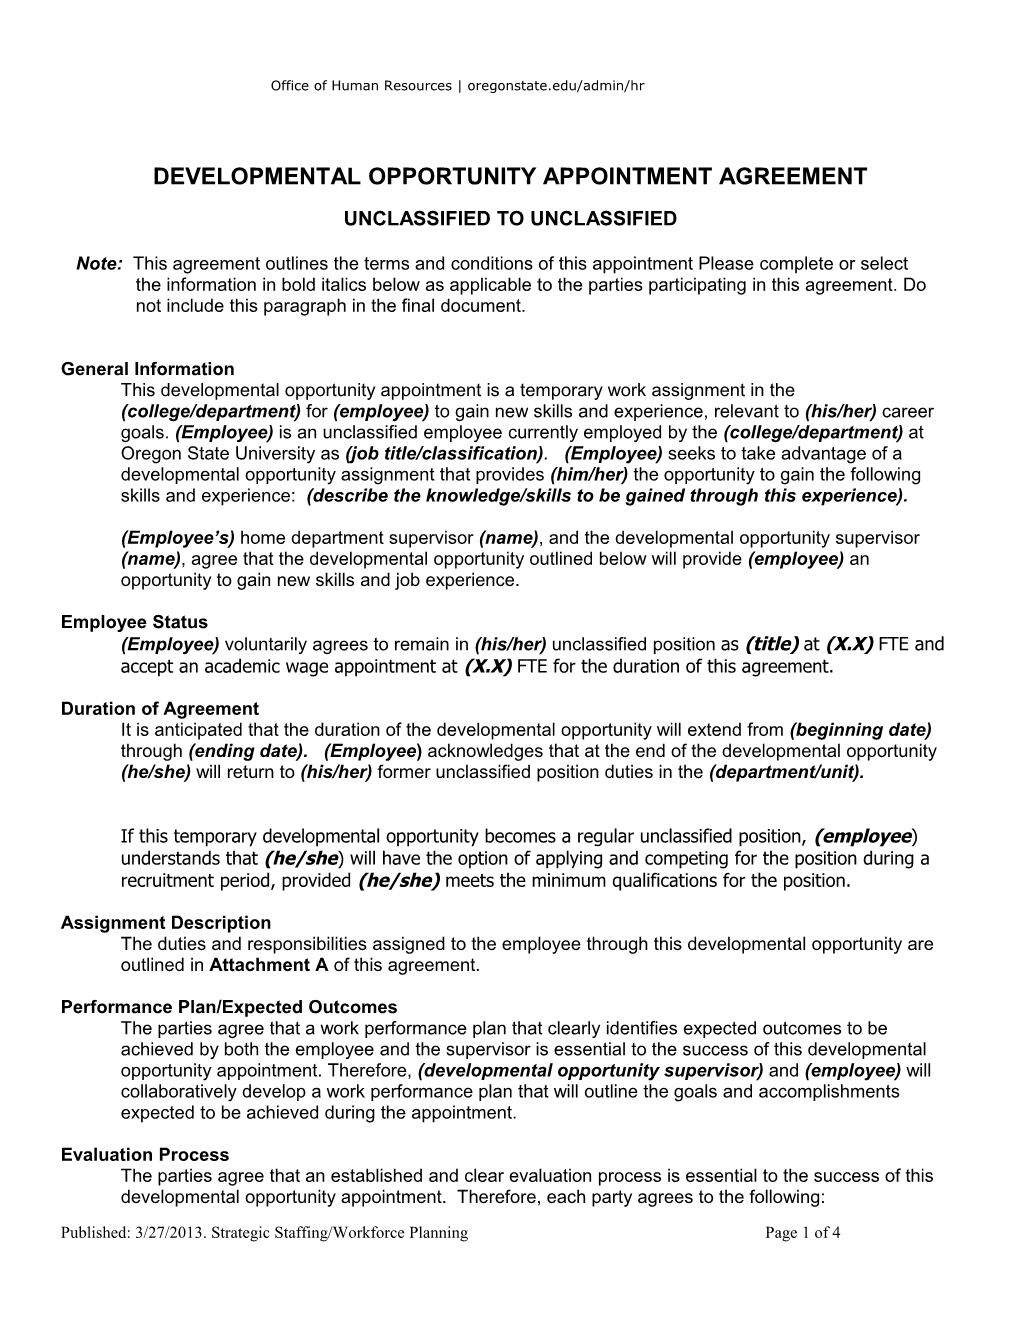 Development Opportunity Appointment Agreement for Unclassified to Unclassified Position